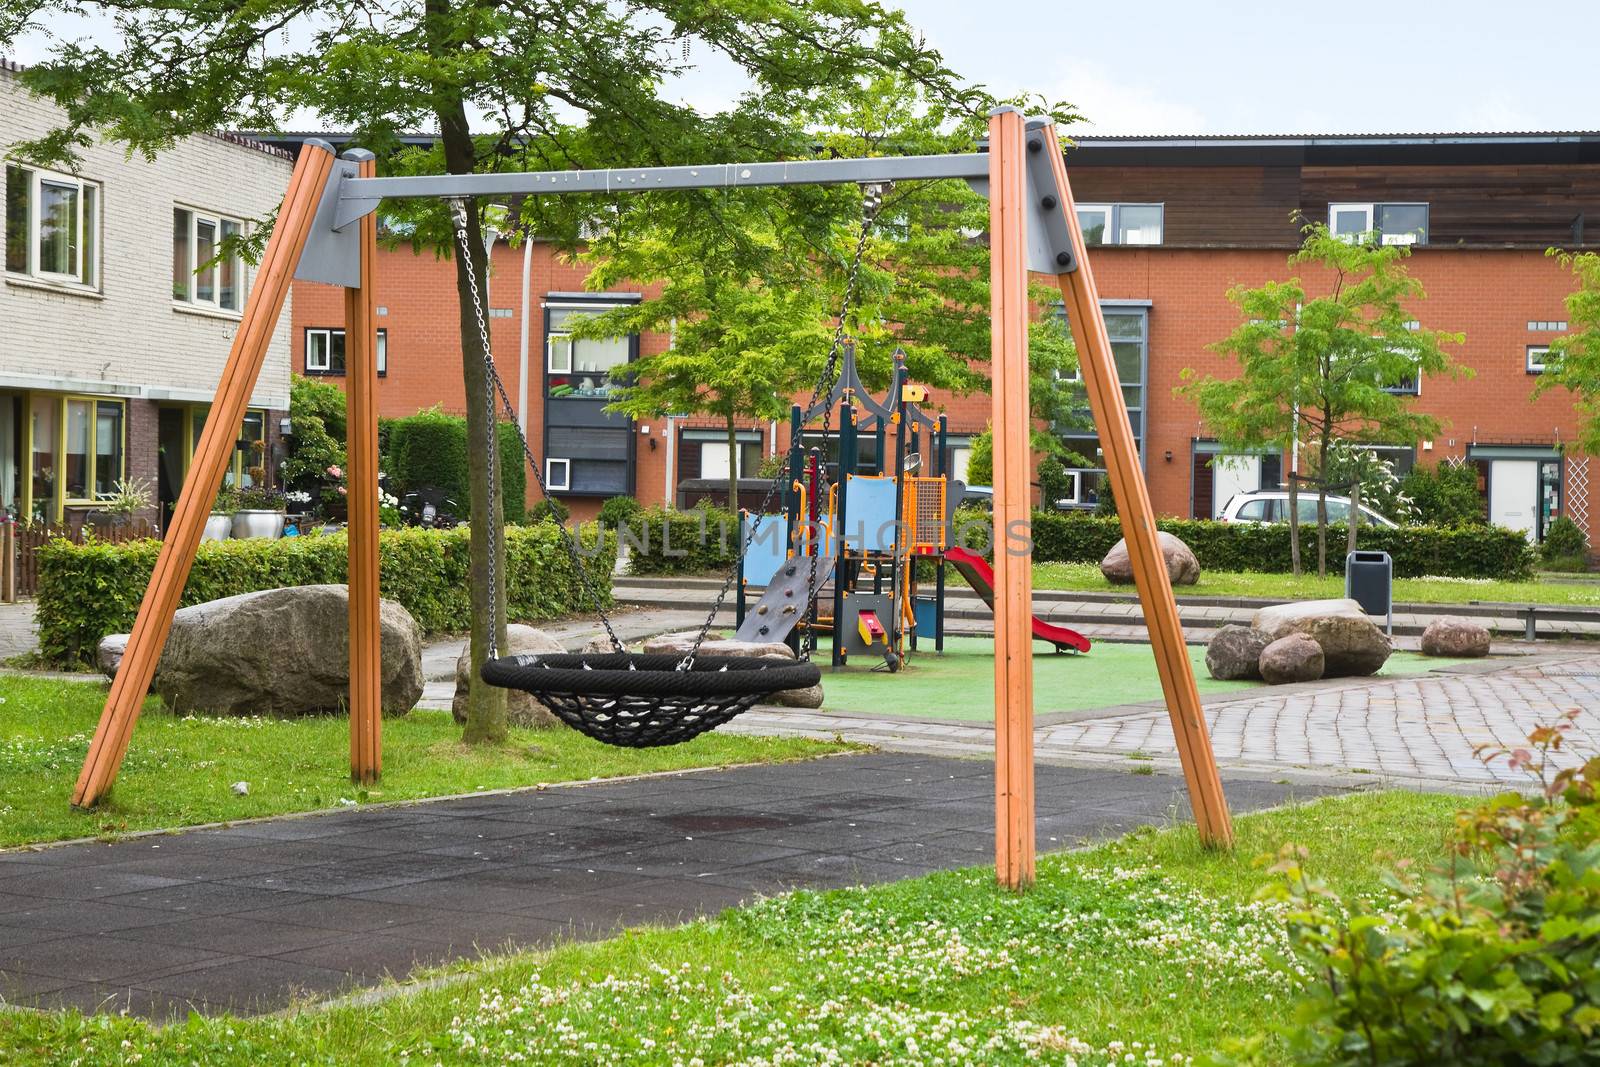 Safe playground in modern suburb for young children by Colette